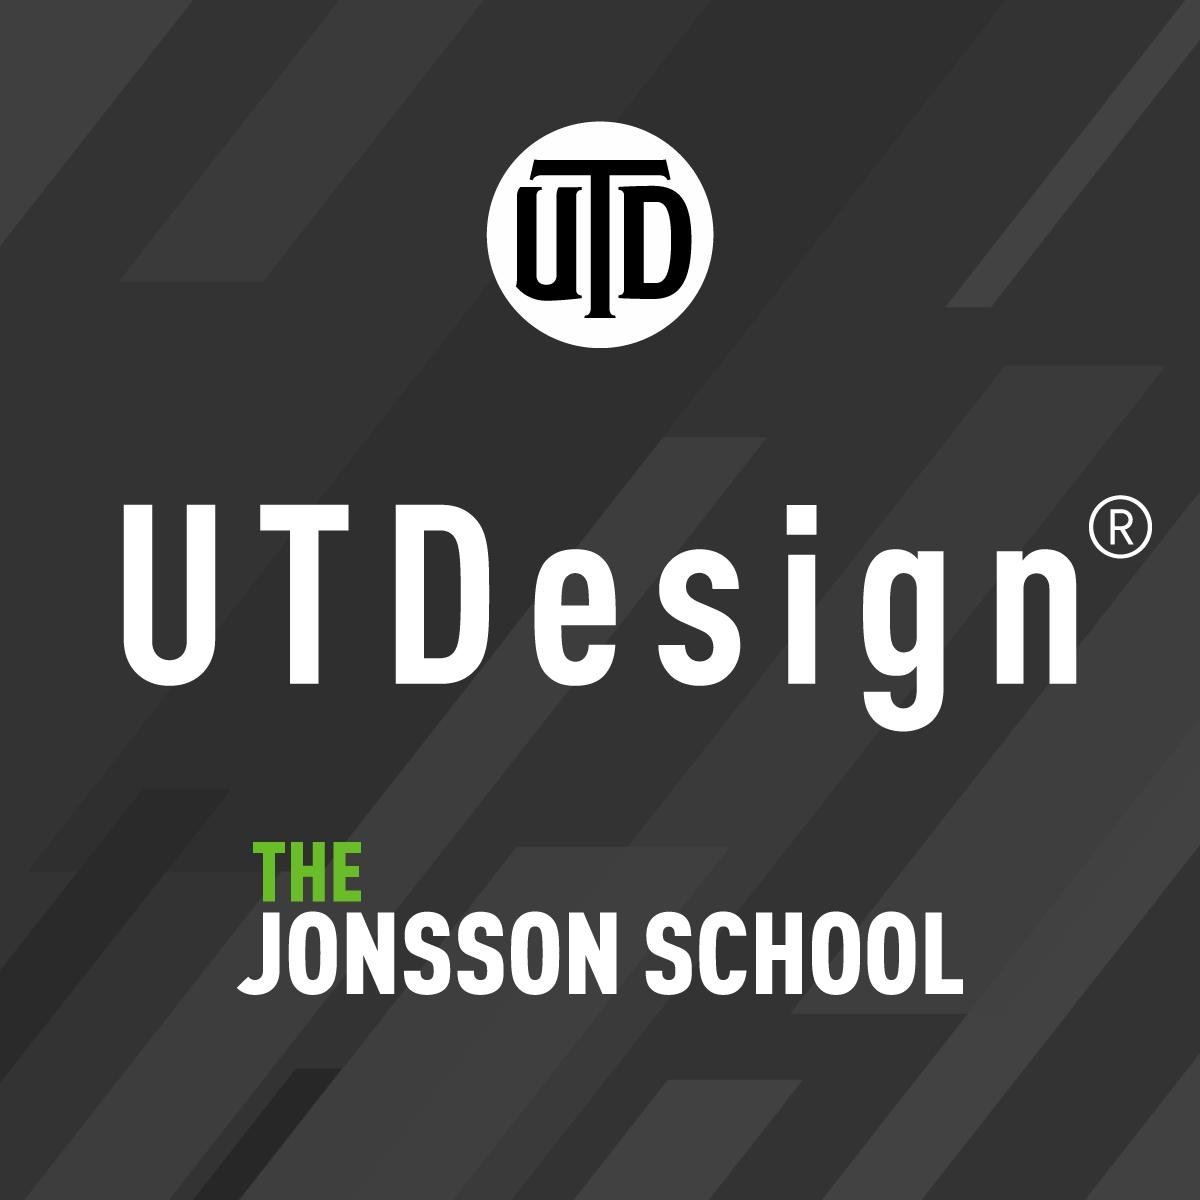 Student Team Innovations for Real-World Engineering & Computer Science Challenges. UTDesign, The Erik Jonsson School at The University of Texas at Dallas